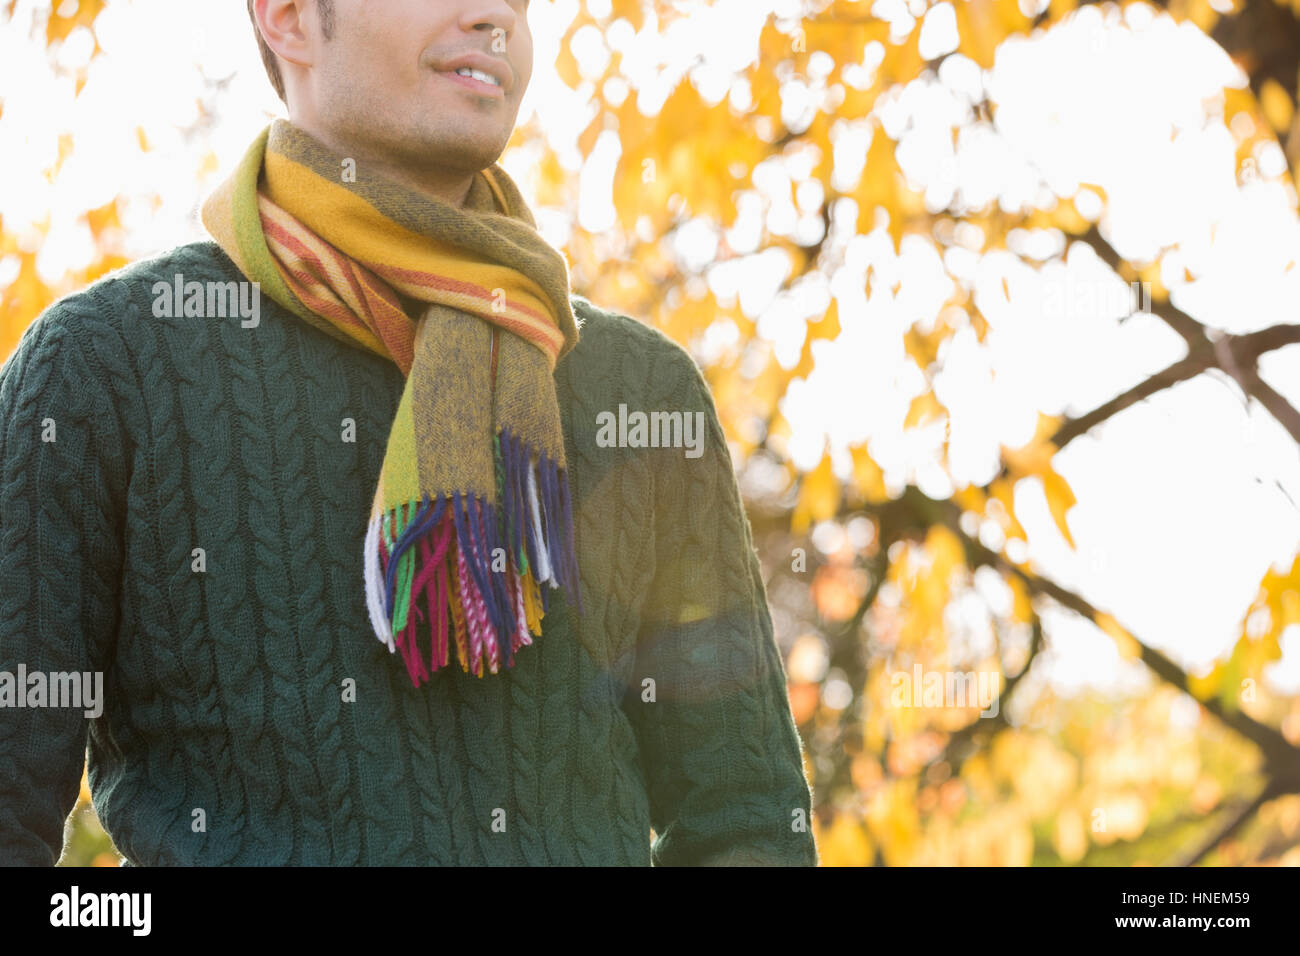 Midsection of man wearing sweater and muffler in park during autumn Stock Photo